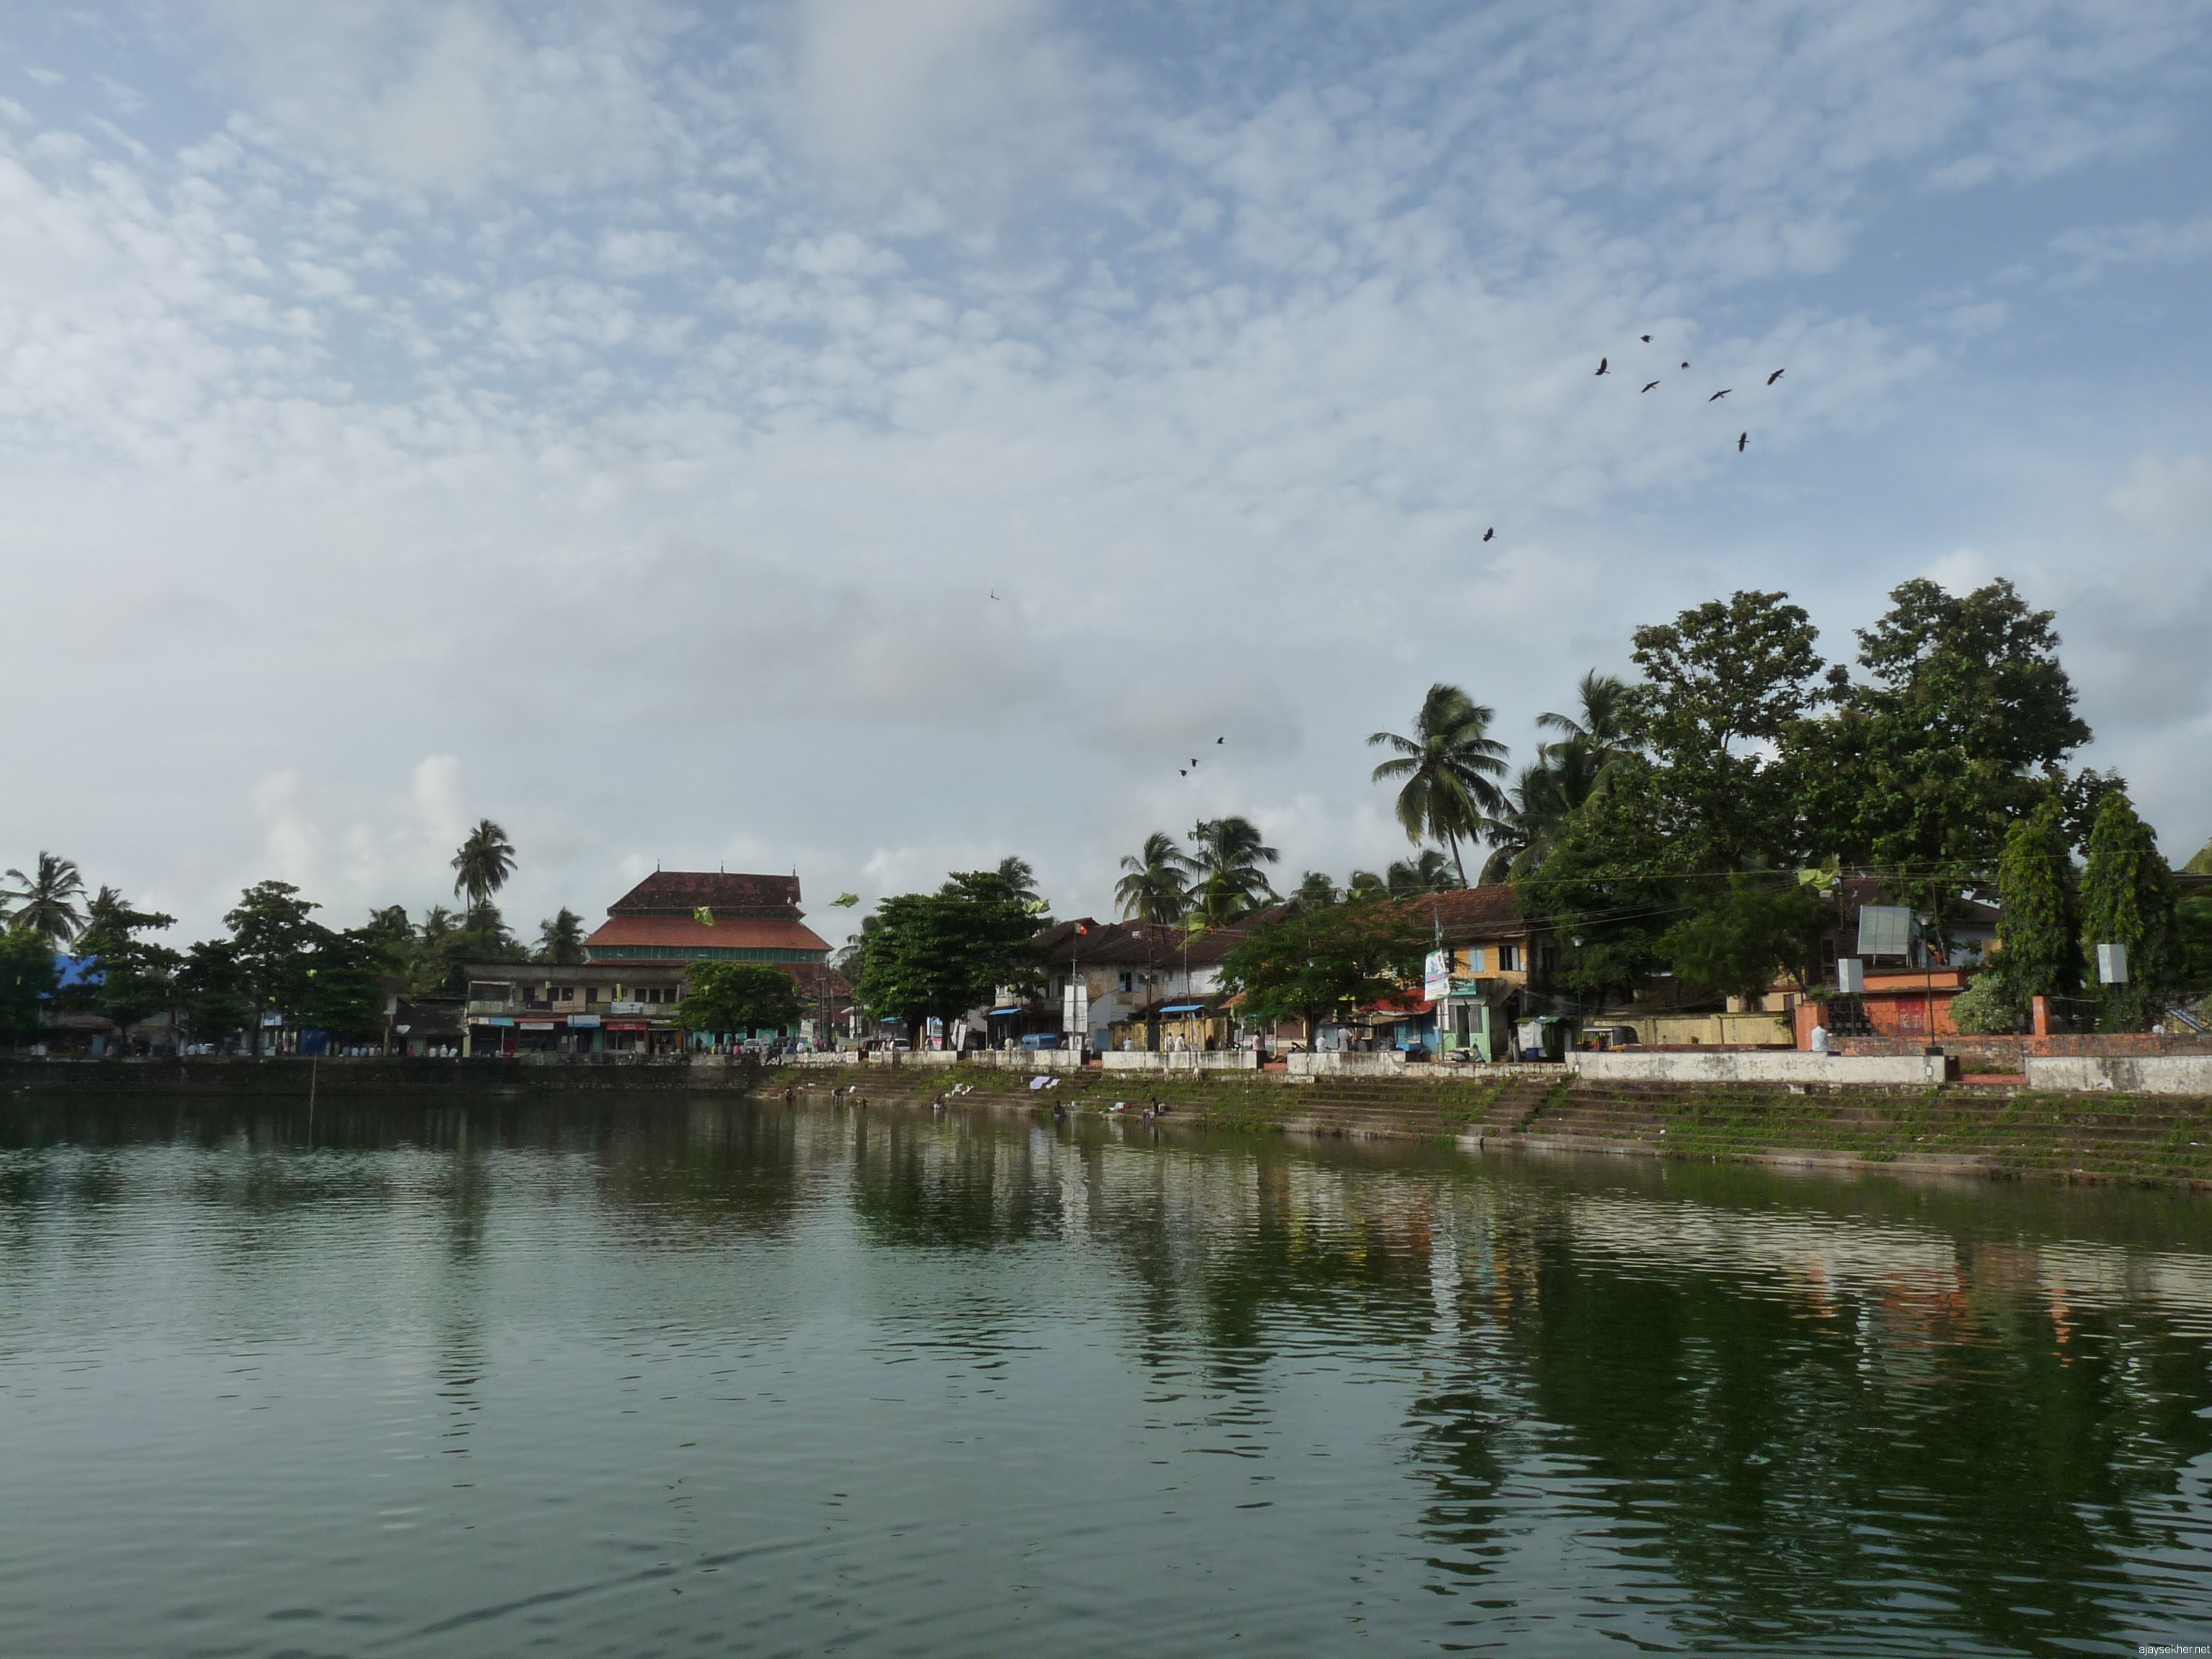 Chira or the great pond of Kutichira. Mishkal Pally in the backdrop. 15 August 2012